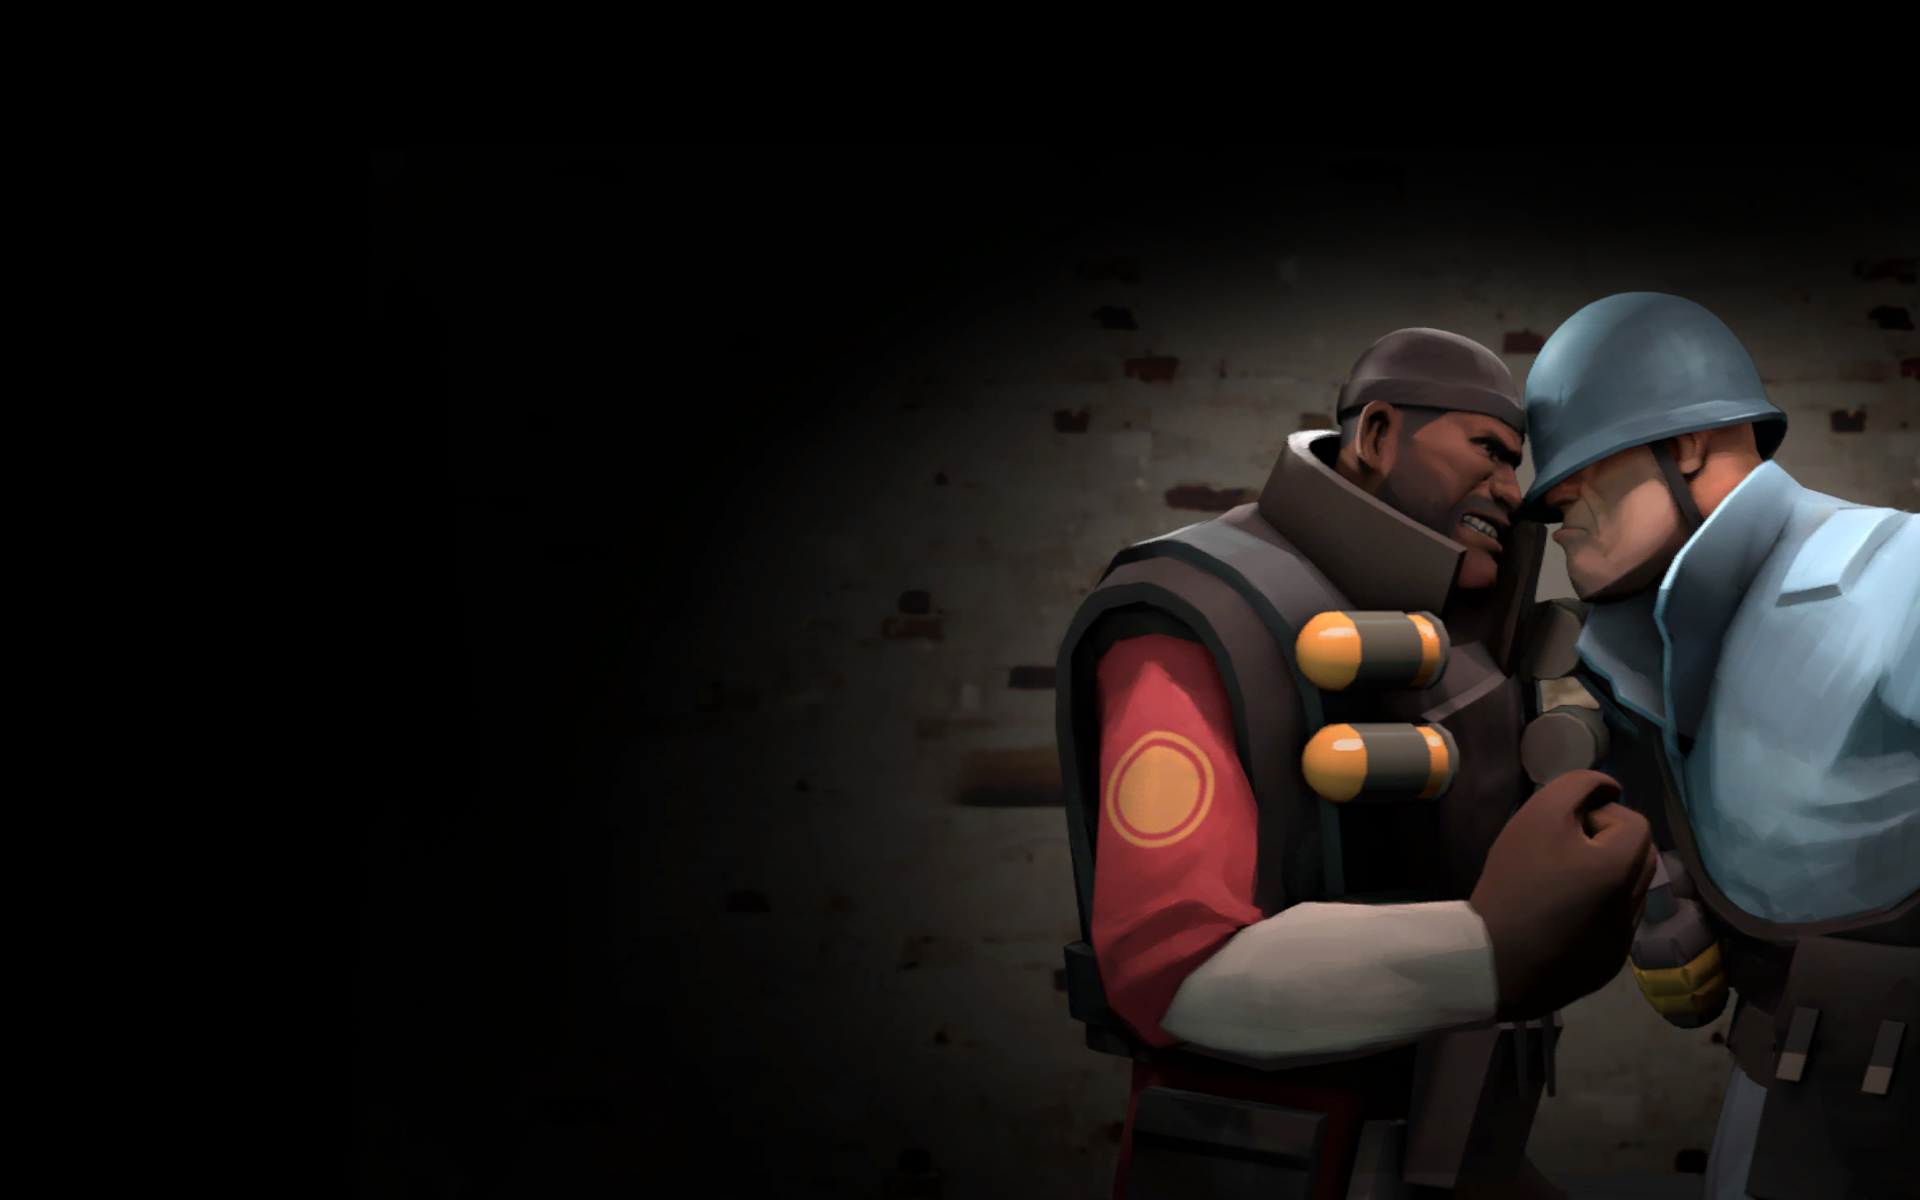 download team fortress 2 for mac